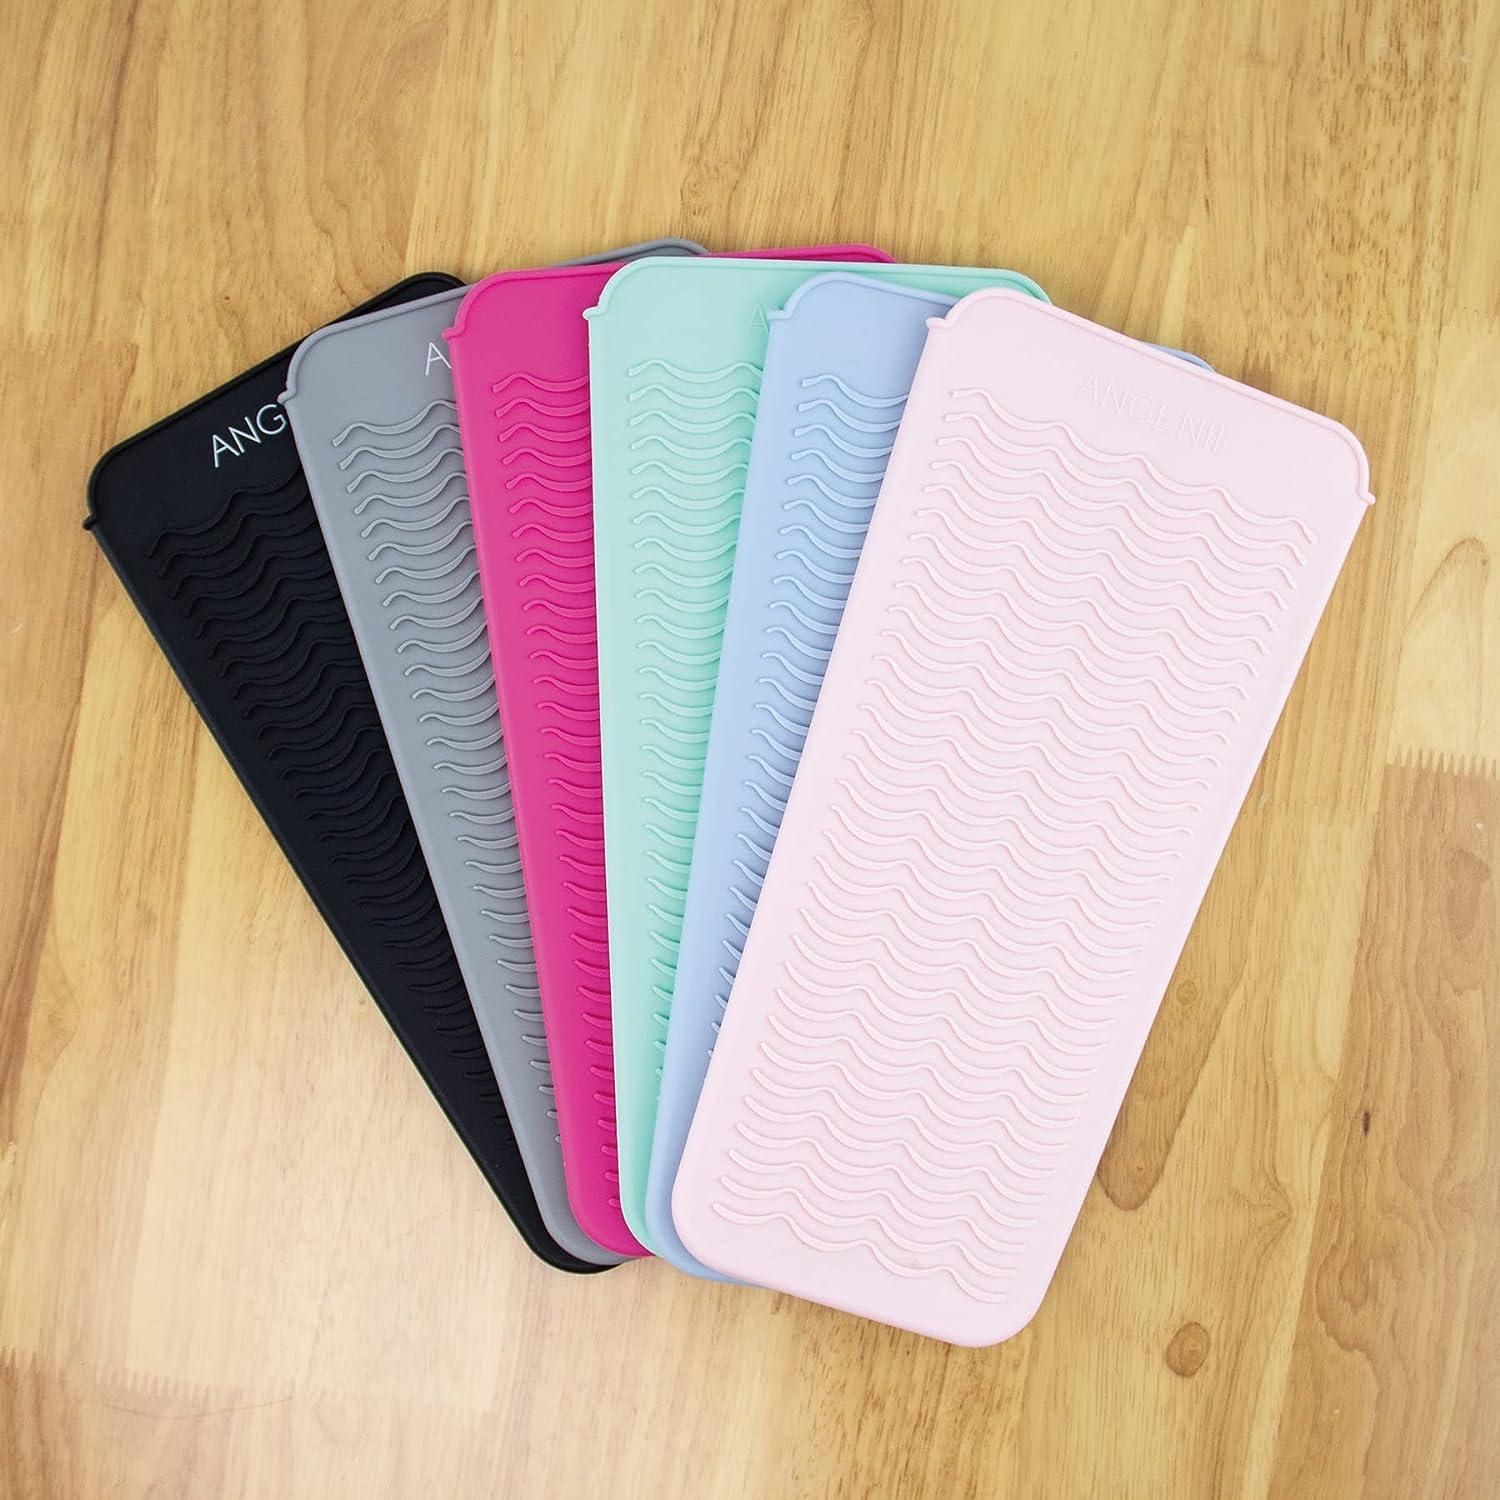 Large Silicone Heat Resistant Mat, Professional Hair Tool Organizer, Hair  Straightener and All Hair Styling Salon Tools, Flat Iron Holder, Travel Hot